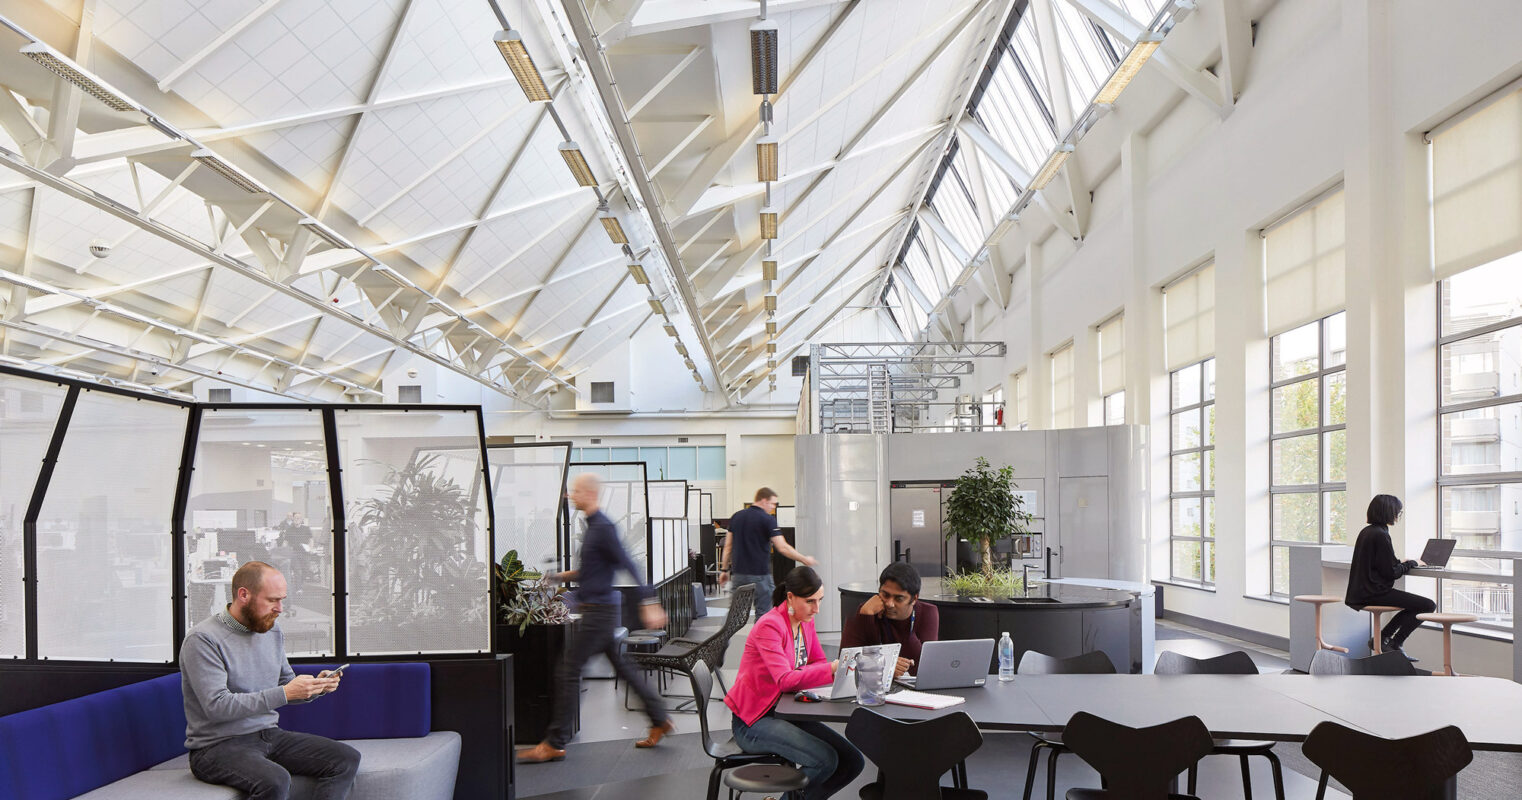 Modern office space featuring a high vaulted ceiling with skylights, exposed white trusses, and clerestory windows, ensuring abundant natural light. Varied workstations with ergonomic furniture are arranged in an open-plan layout, encouraging collaboration. Transparent partition walls provide privacy without sacrificing openness or light flow.